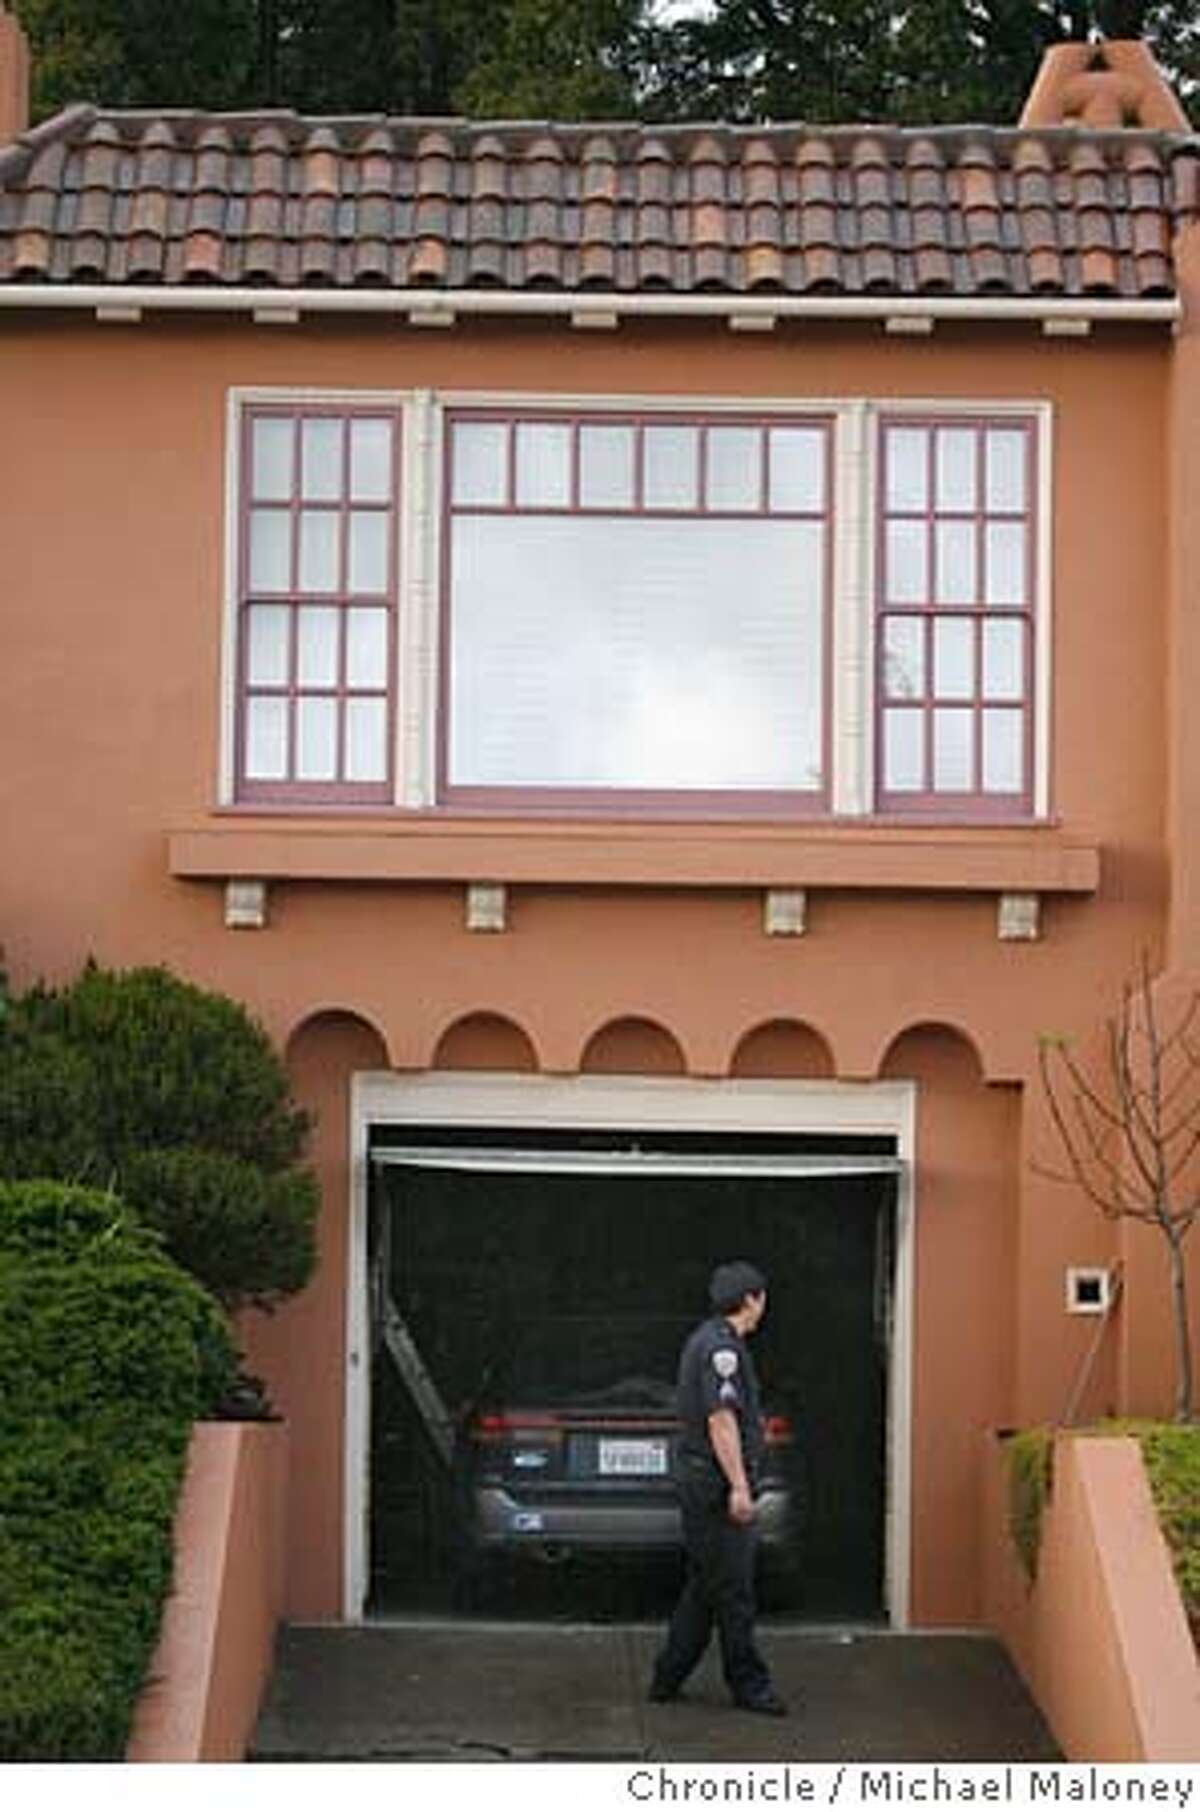 HOMICIDE_040_MJM.jpg A SFPD officer looks into the garage where the homicide occured. A 3-year-old girl is dead and her mother and 3-year-old brother have been taken to hospitals after they were found this afternoon in an SUV inside the garage of a home in Ingleside Terrace section of San Francisco, police said. The mother, age 40, apparently tried to kill both her children and herself, said Lt. John Hennessey, head of the police homicide detail. Her name was not immediately released. The woman apparently lit a barbecue grill inside an SUV in the garage of their home at 370 Moncada Way, Hennessey said. Photo by Michael Maloney / San Francisco Chronicle on 3/29/06 in San Francisco,CA MANDATORY CREDIT FOR PHOTOG AND SF CHRONICLE/ -MAGS OUT